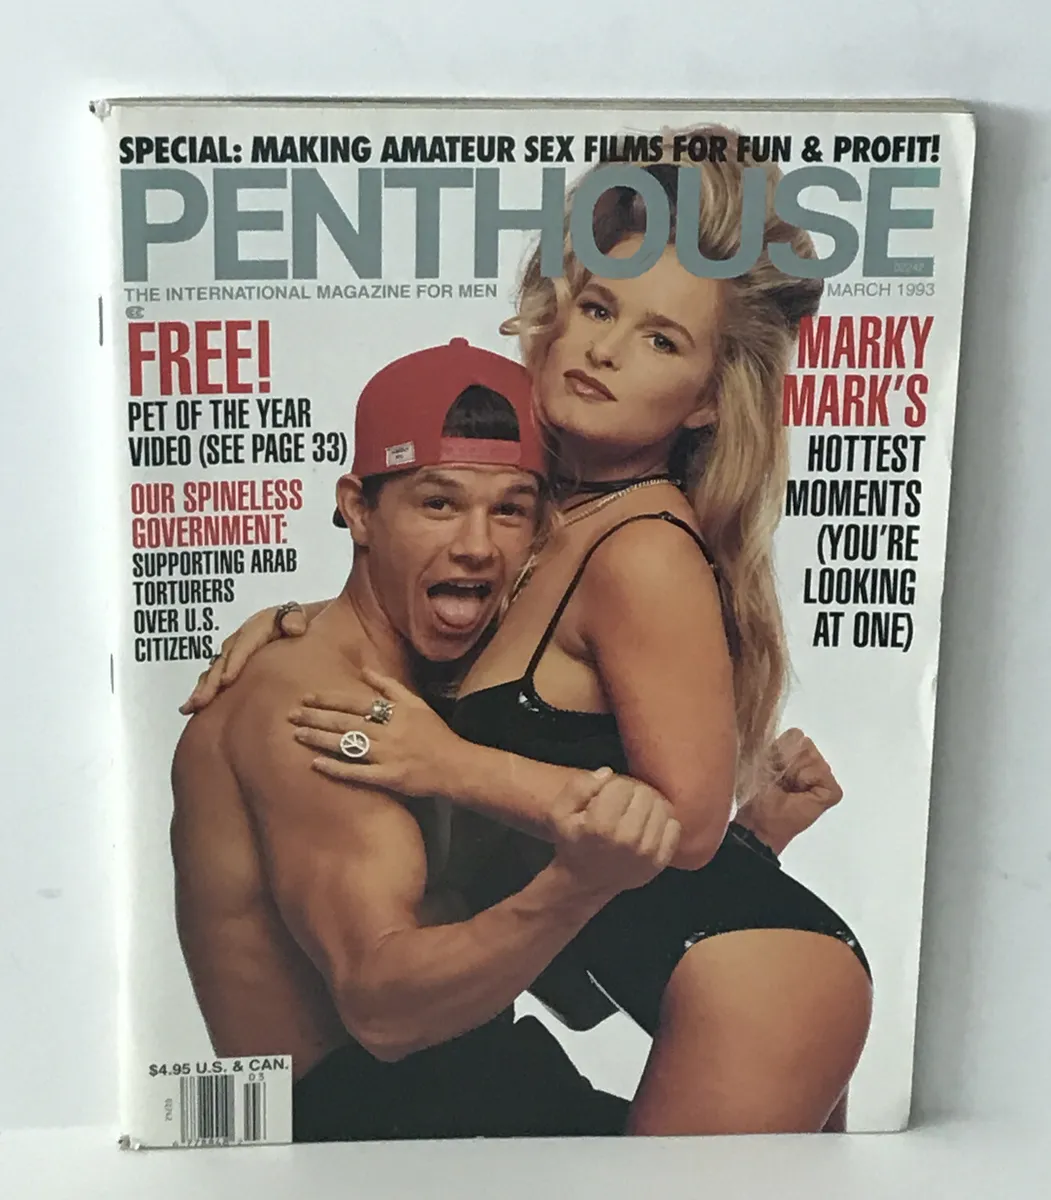 Penthouse Marky Mark Wahlberg andamp; March Pet Month Natalie Smith Cover March 1993 eBay